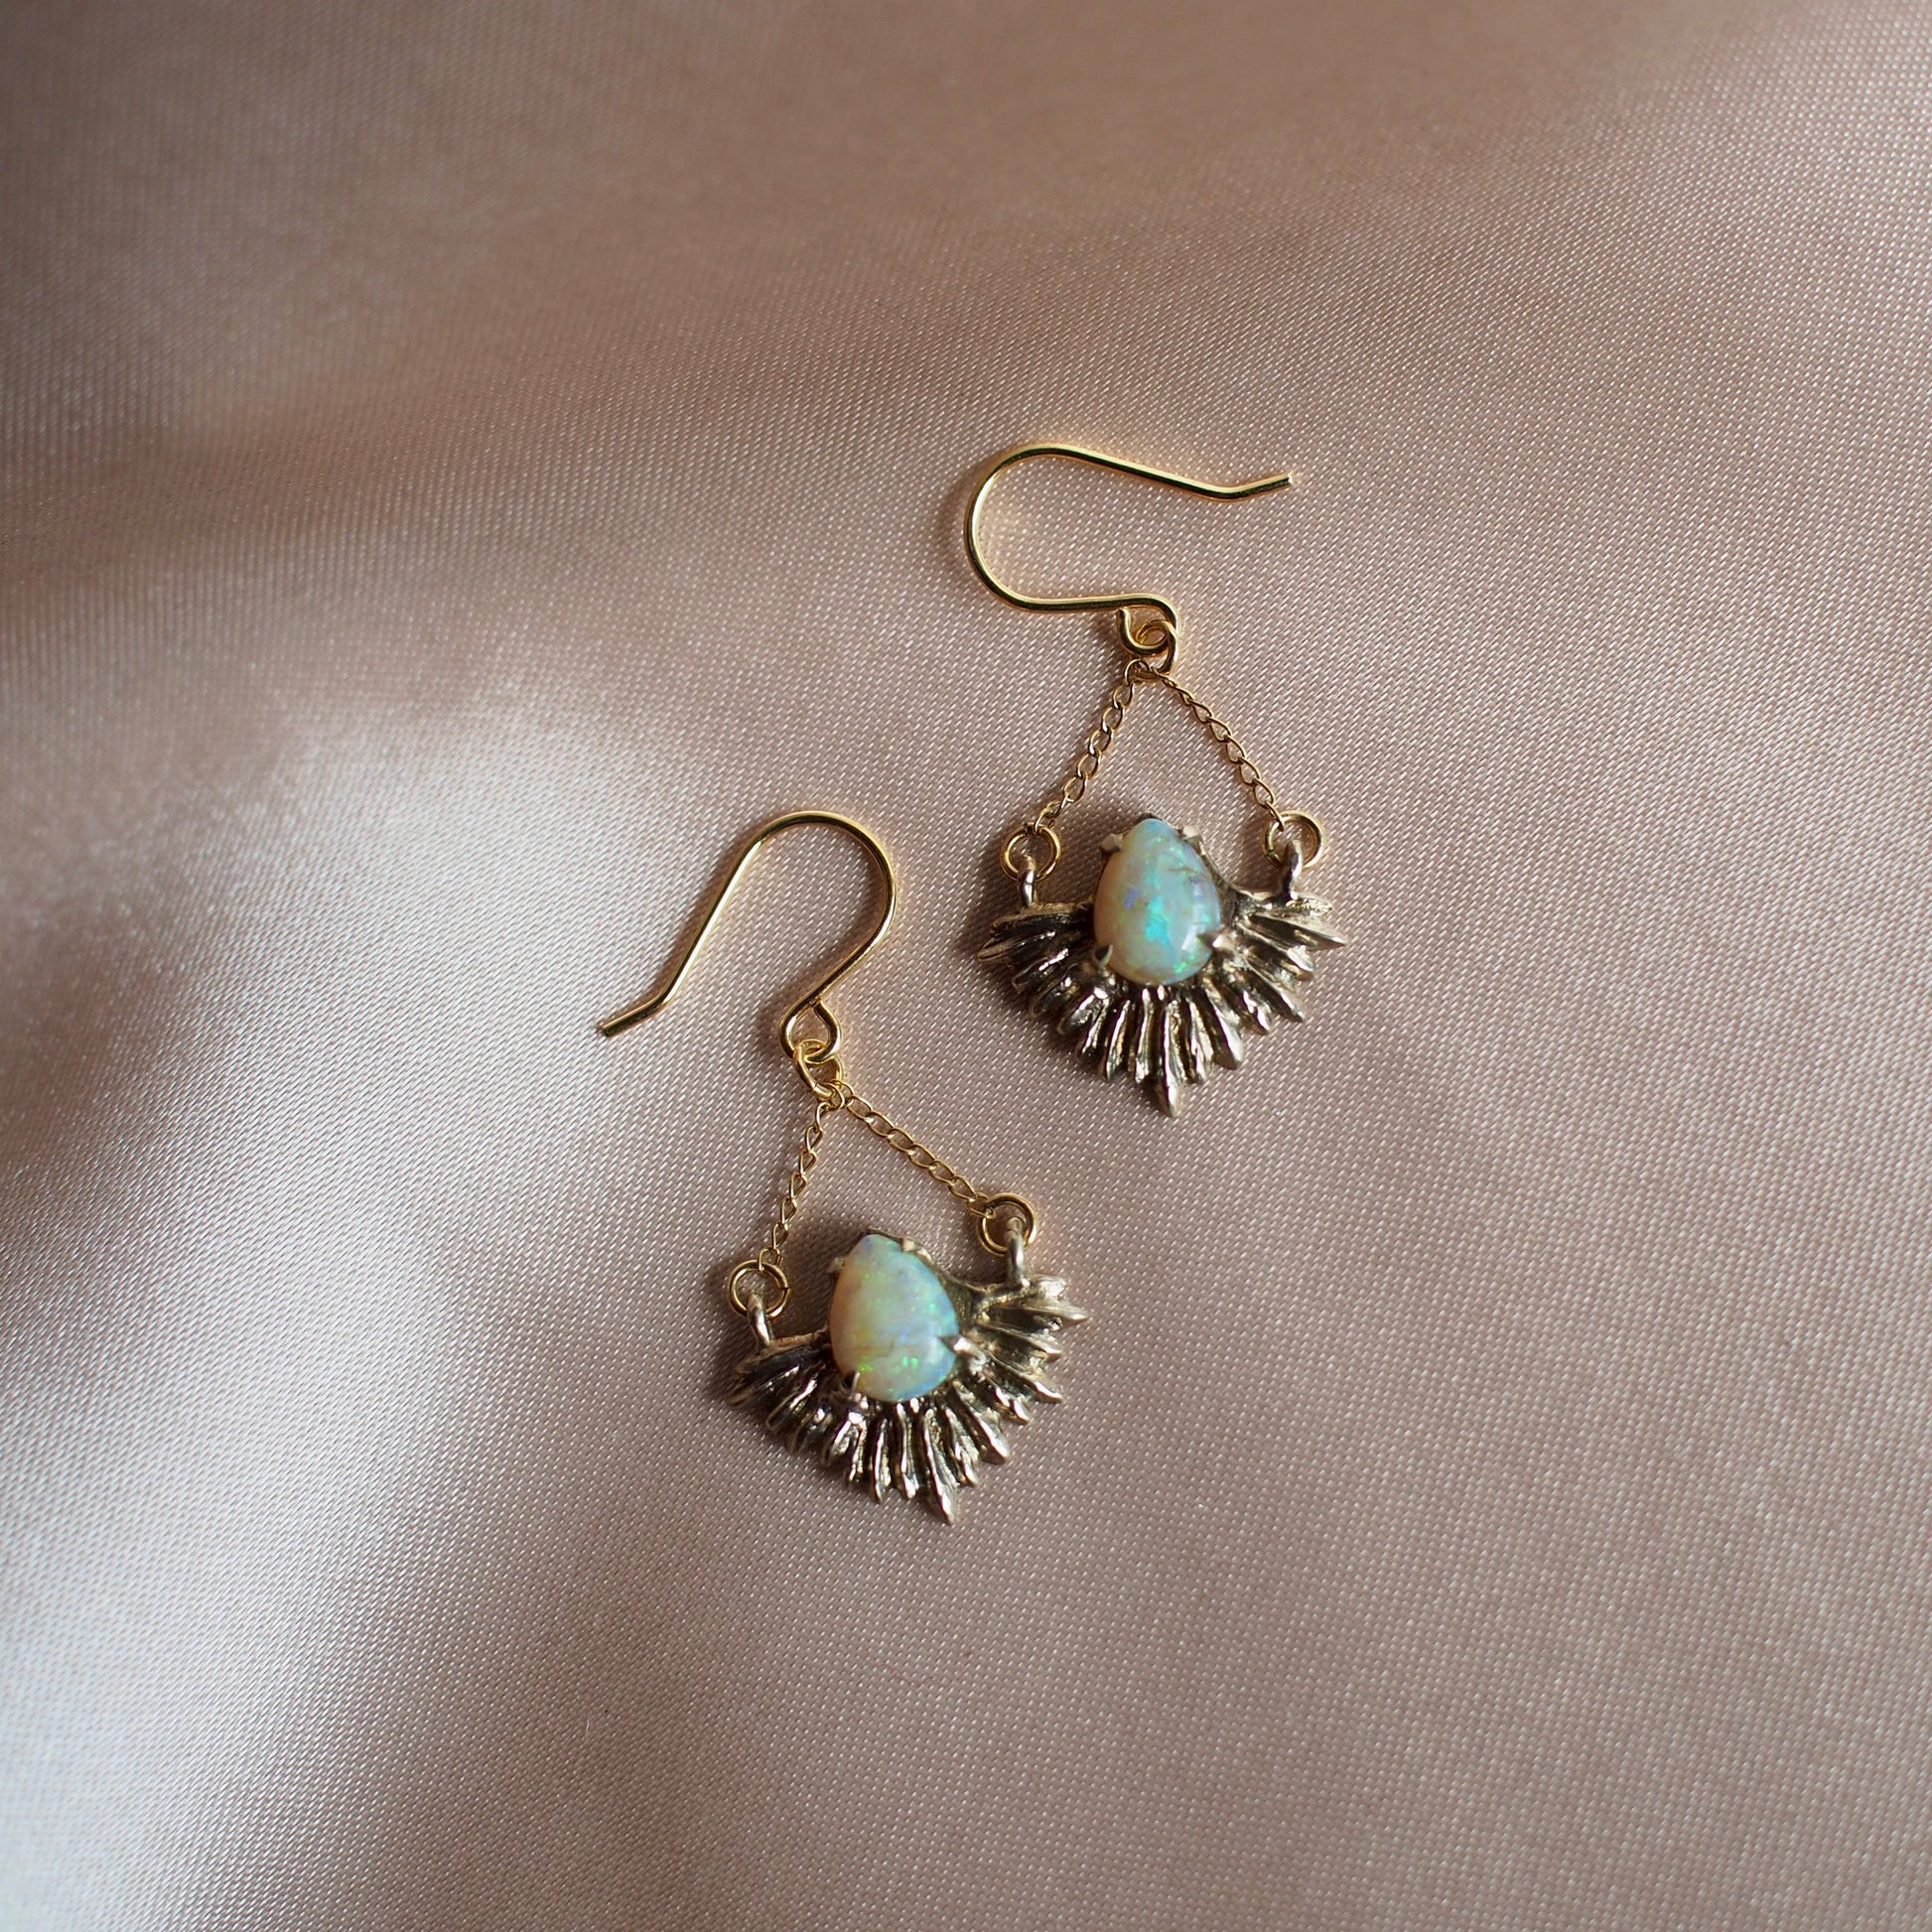 Gold Tone bronze earrings in the shape of beams of light set with teardrop shaped, lab grown opals.